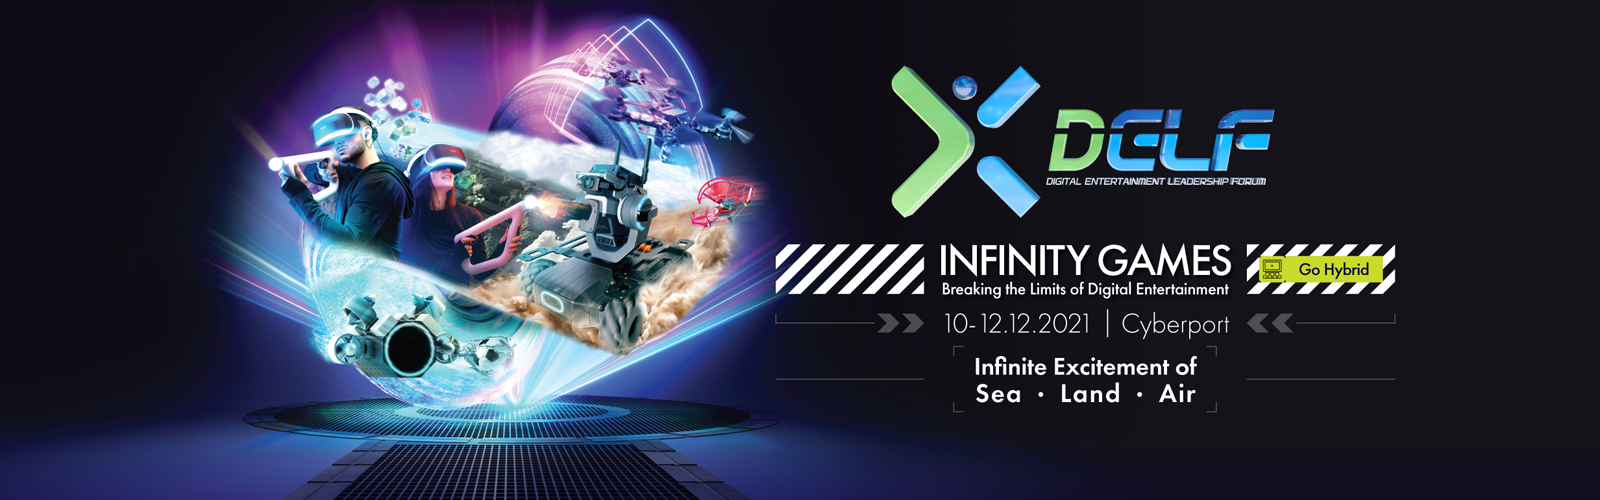 “Infinity Games – Breaking the Limits of Digital Entertainment”, theme of Digital Entertainment Leadership Forum